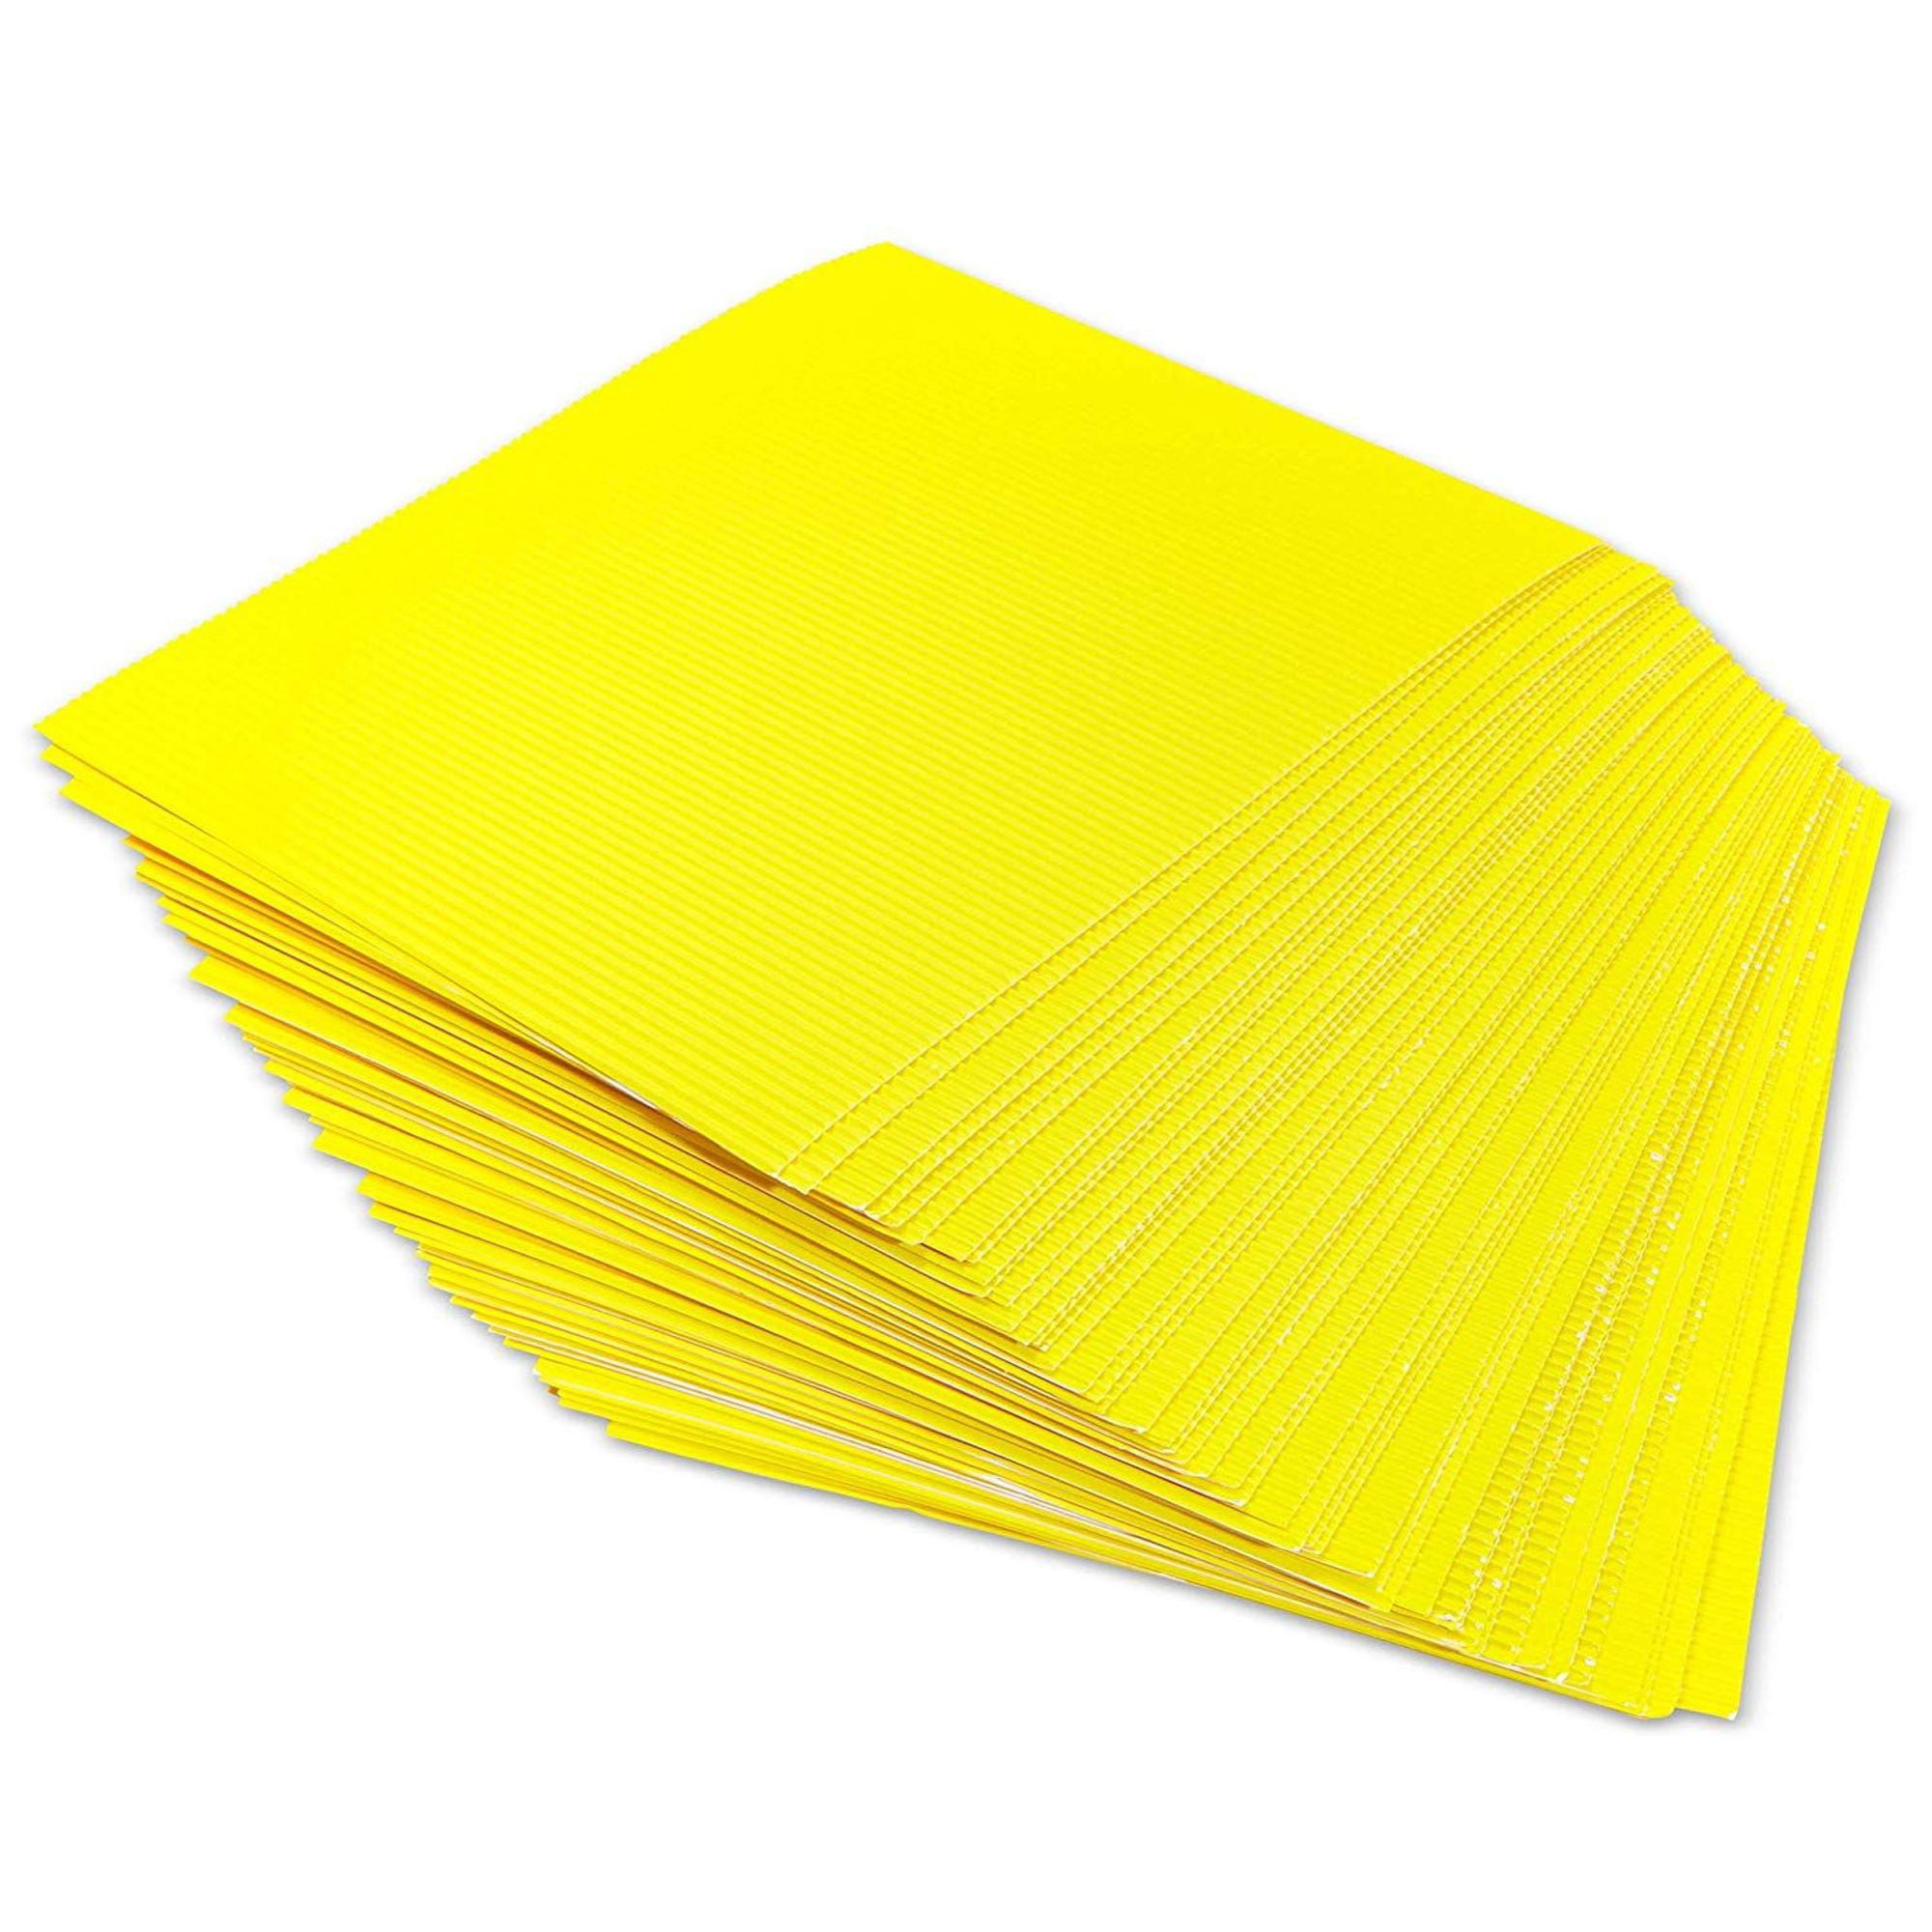 48 Packs Corrugated Cardboard Paper Sheets for DIY, Crafts, Party ...